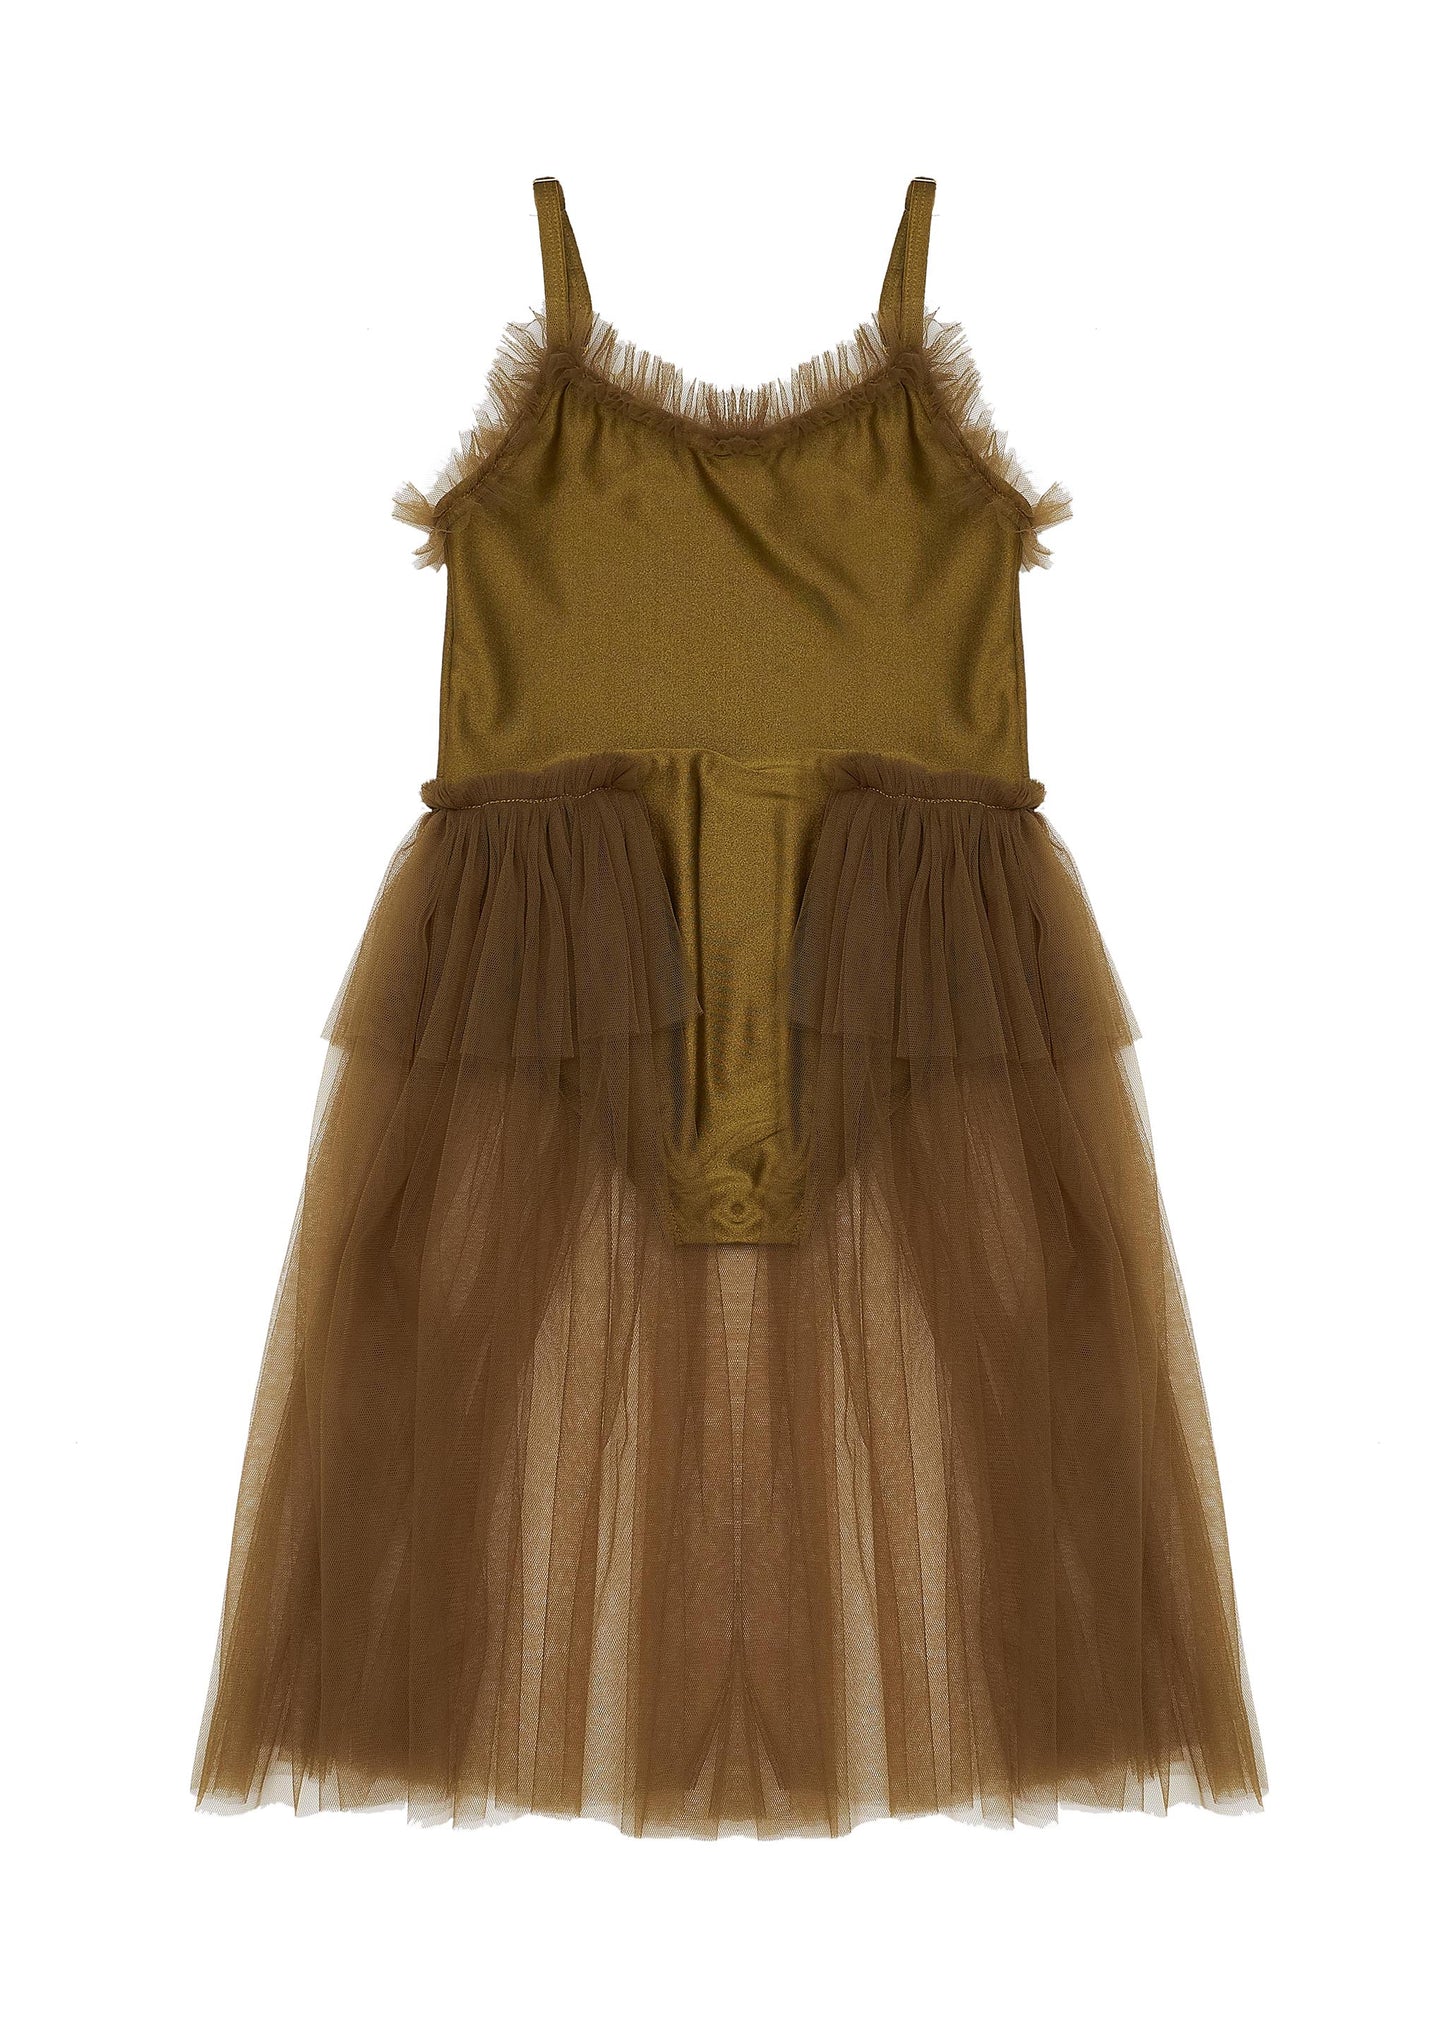 Bella and Lace Elanore Dress Baked Olive